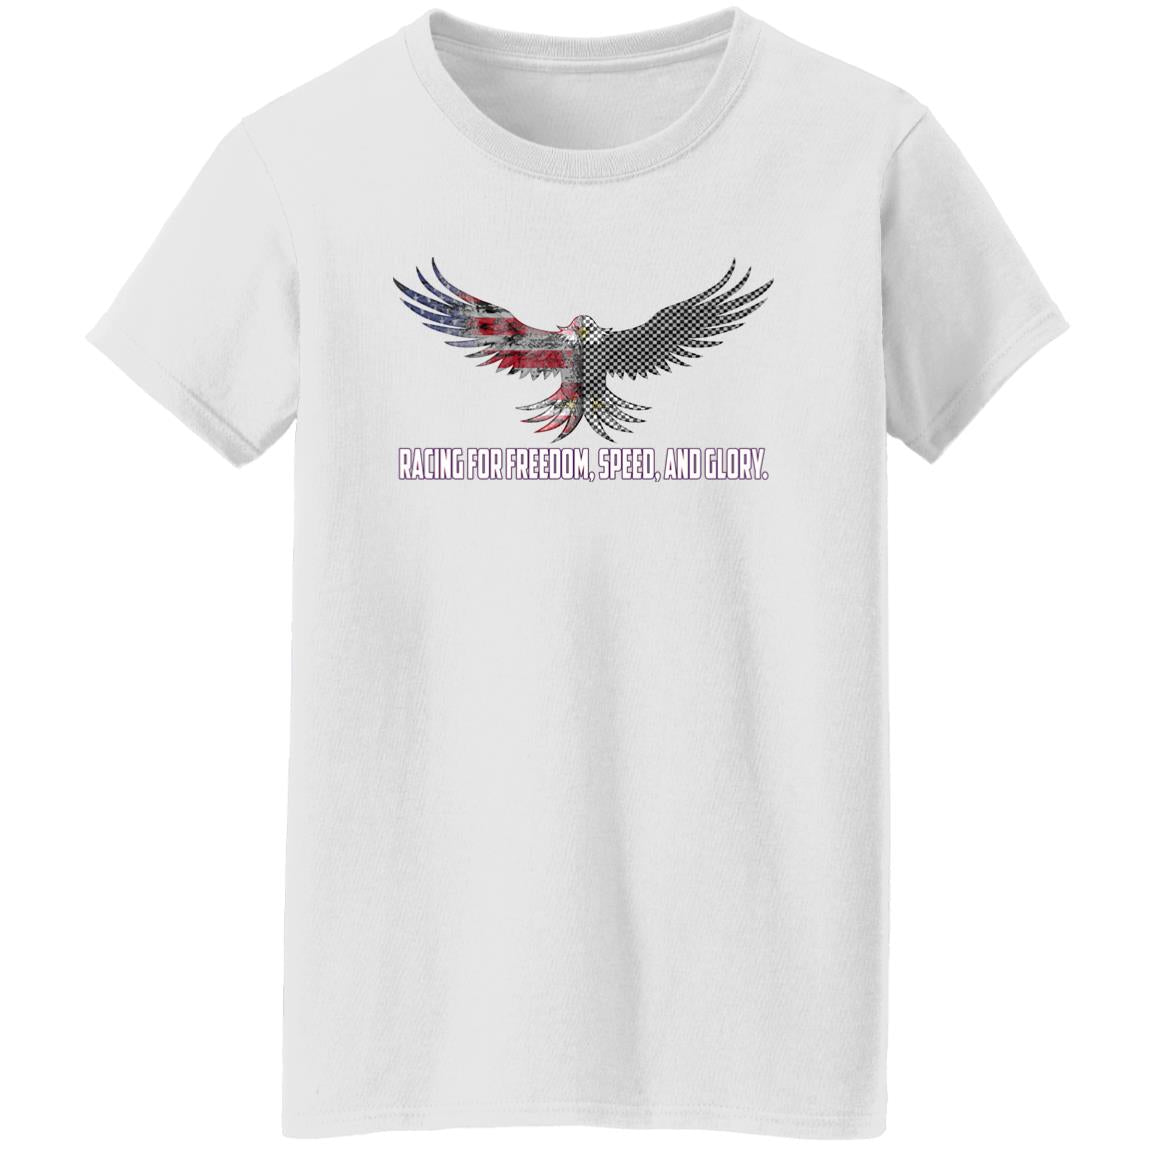 Racing For Freedom, Speed, And Glory Ladies' 5.3 oz. T-Shirt